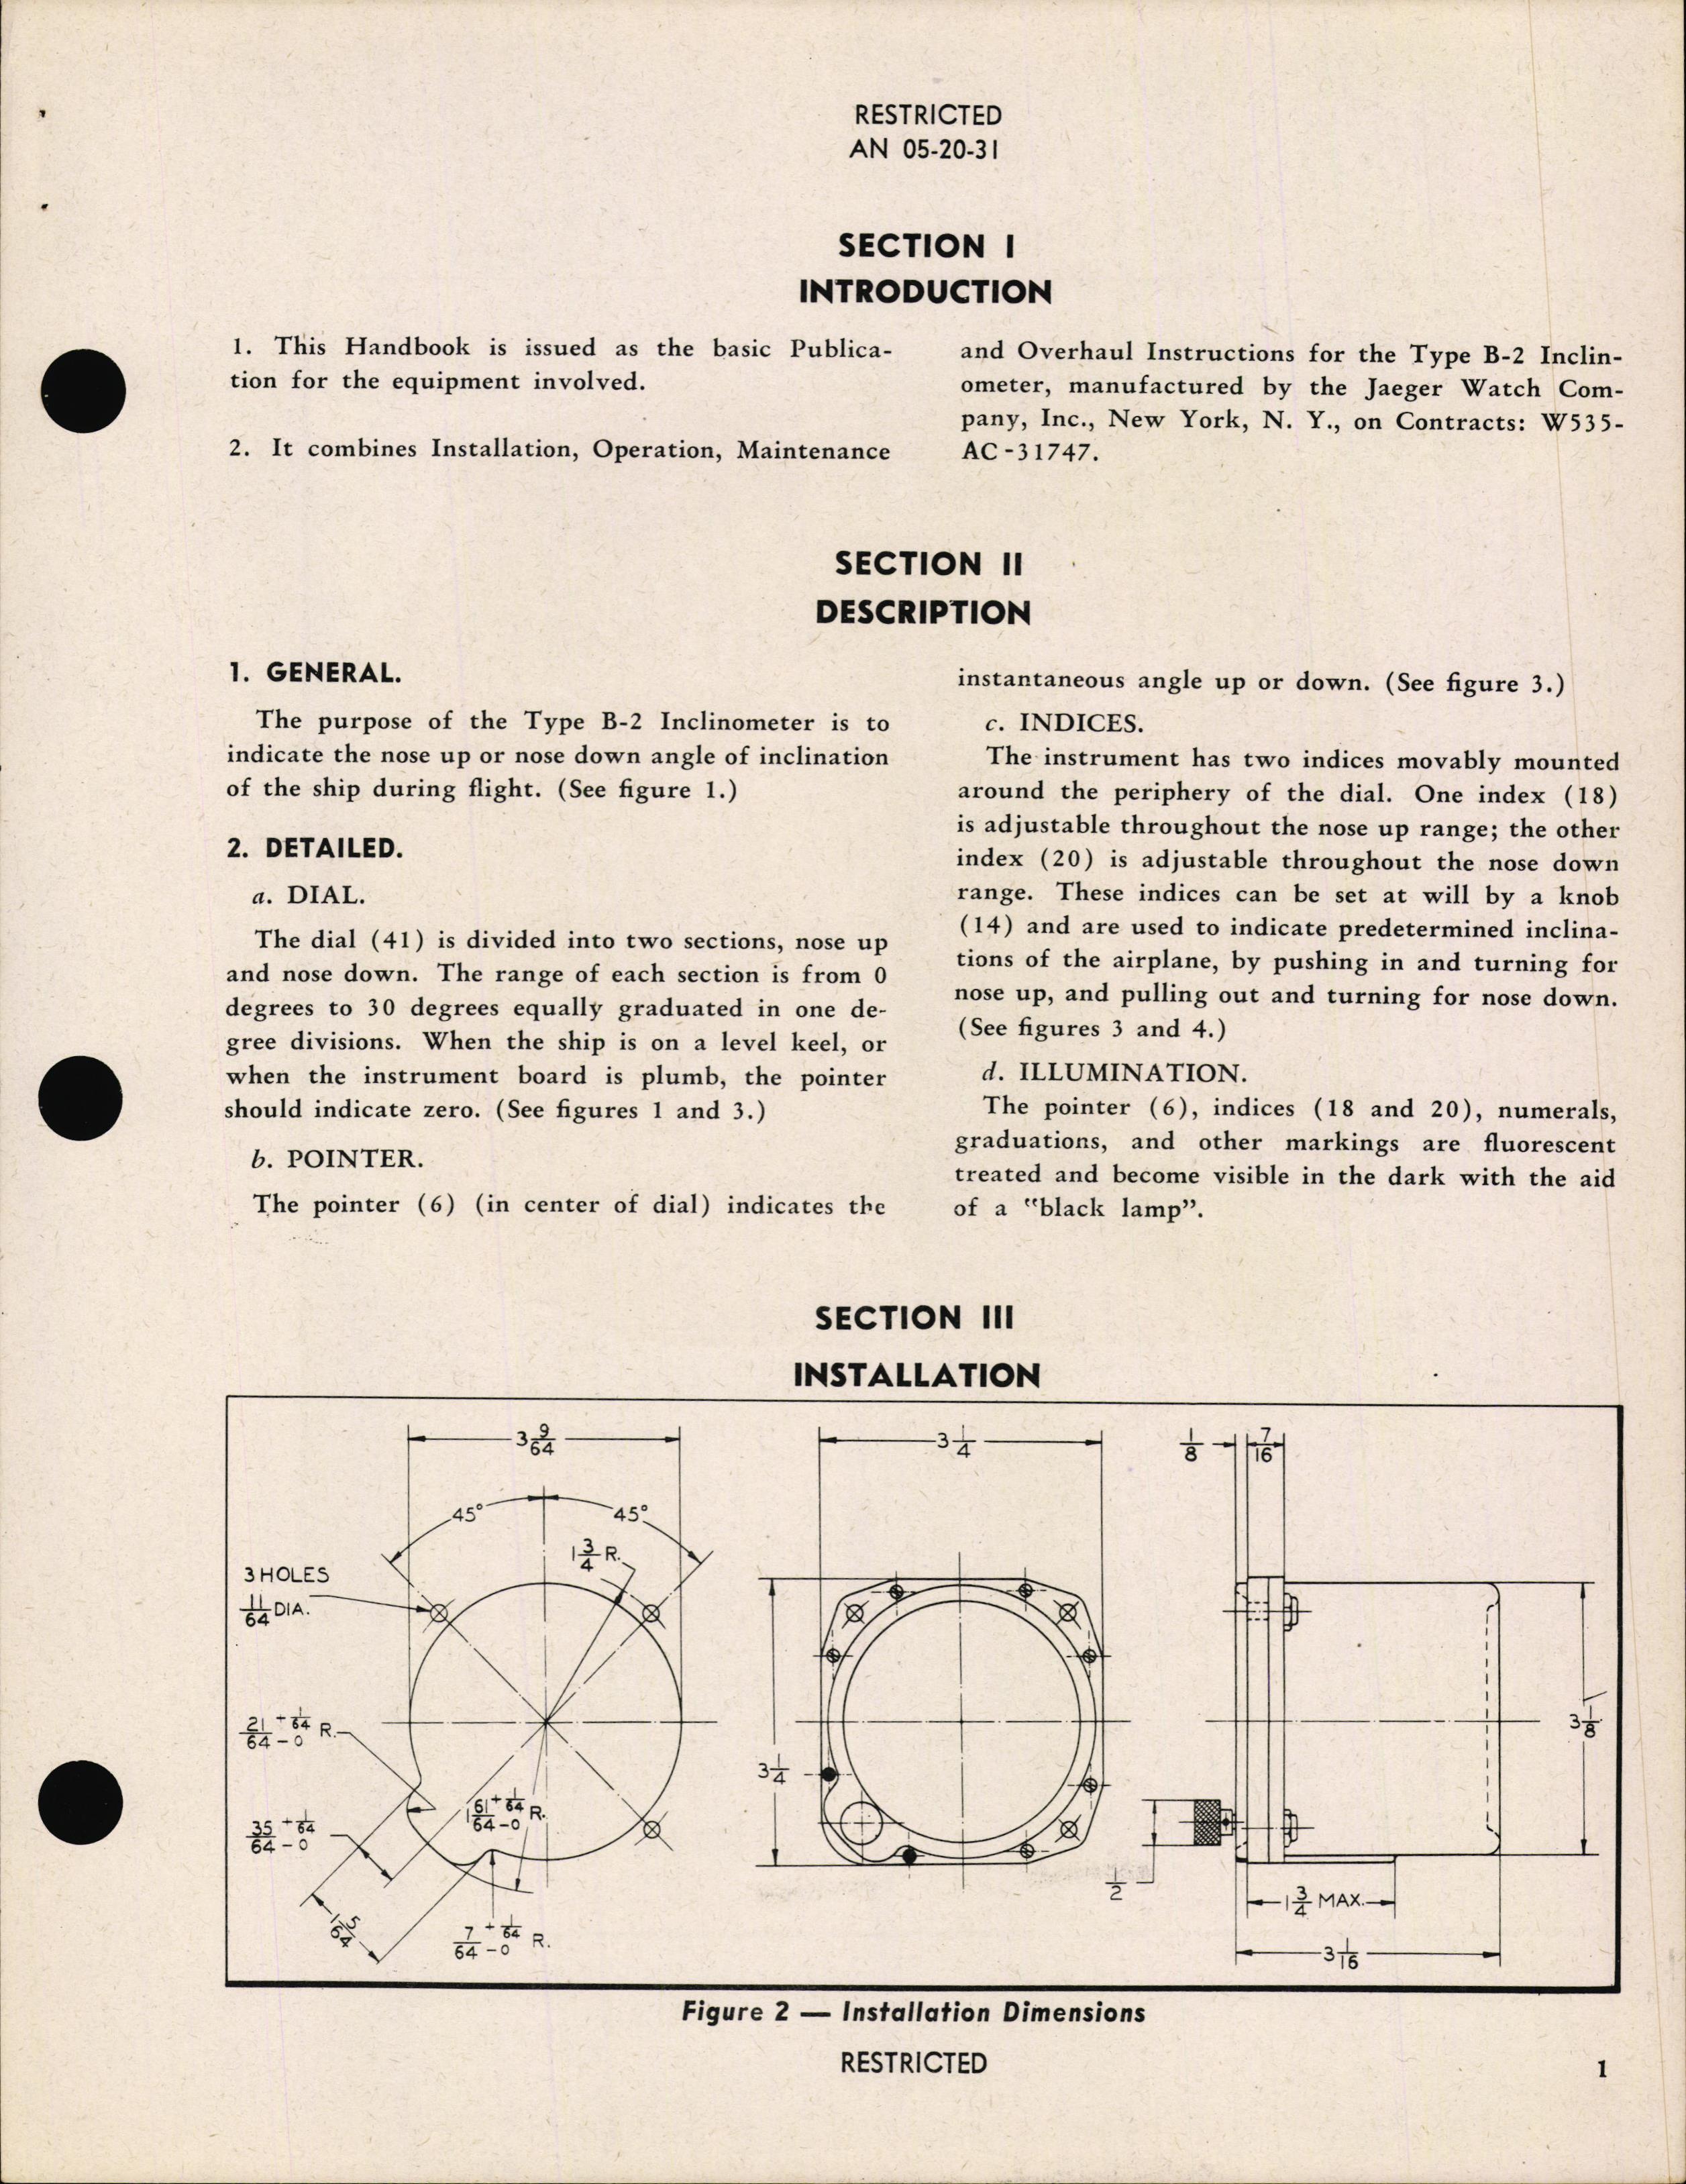 Sample page 7 from AirCorps Library document: Handbook of Instructions with Parts Catalog for Type B-2 Inclinometer